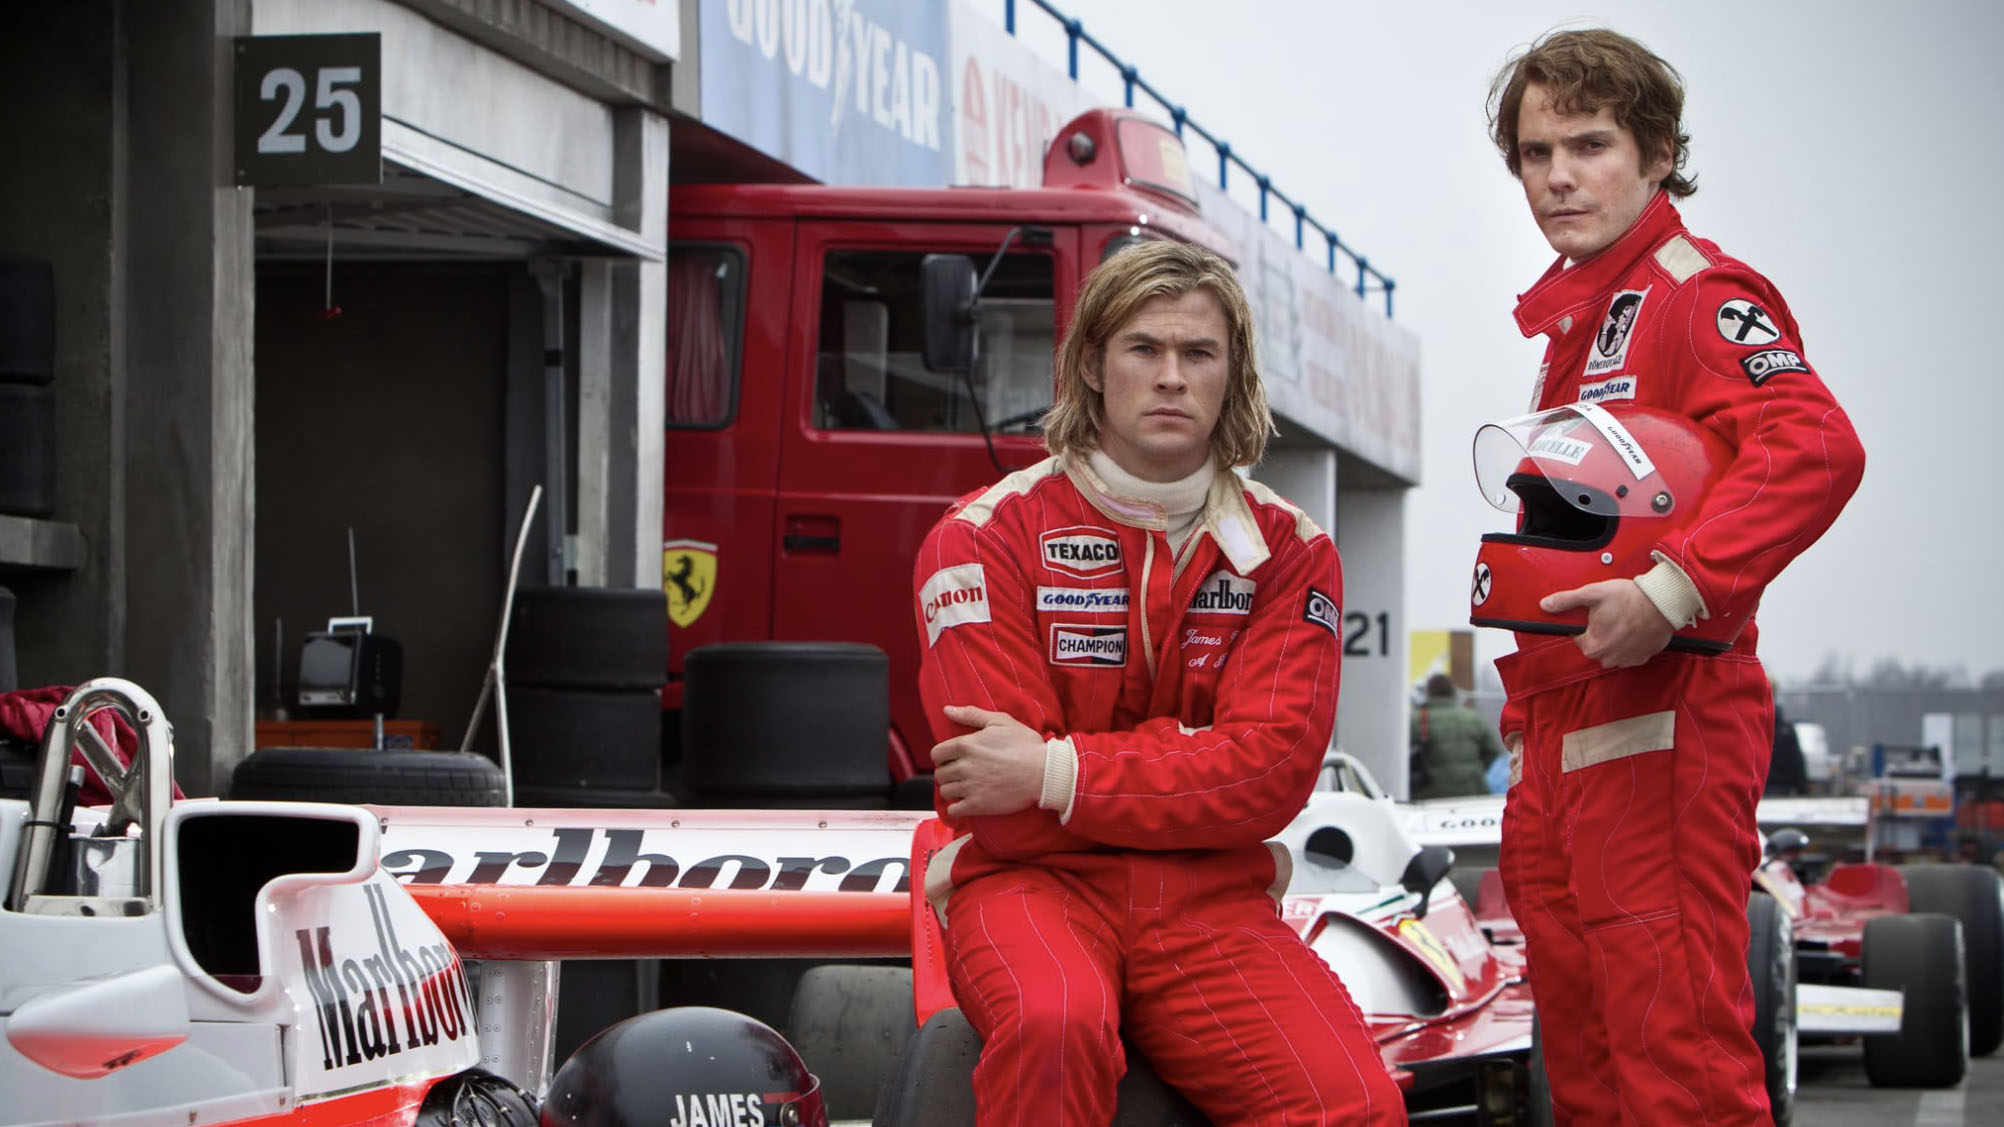 question of the week: which formula one rivalry deserves a movie?